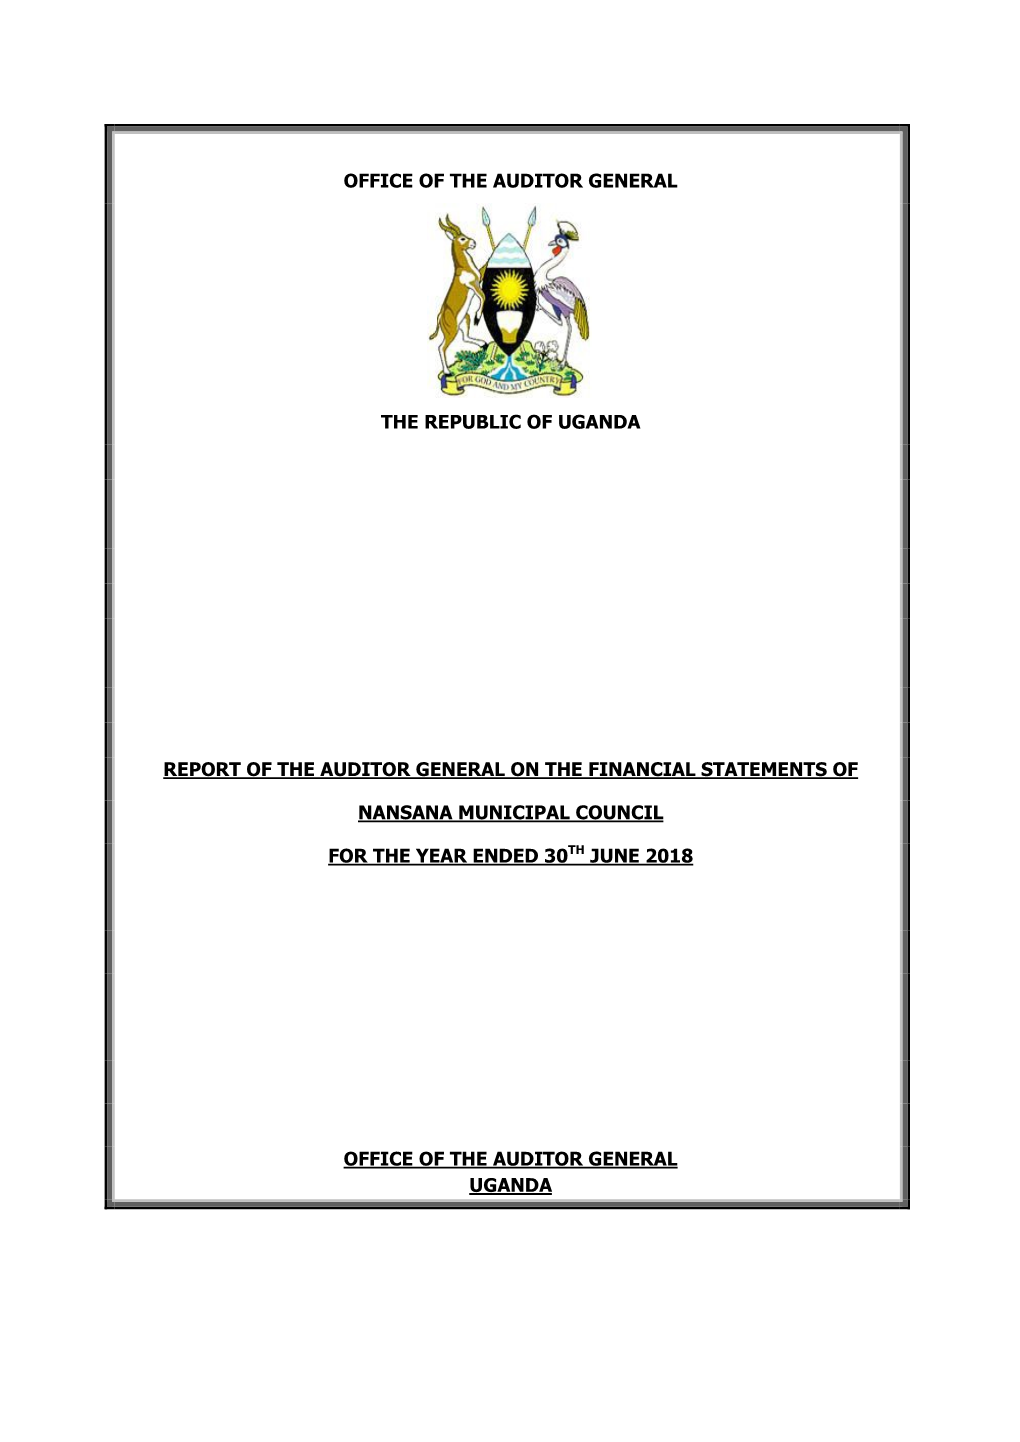 Office of the Auditor General the Republic of Uganda